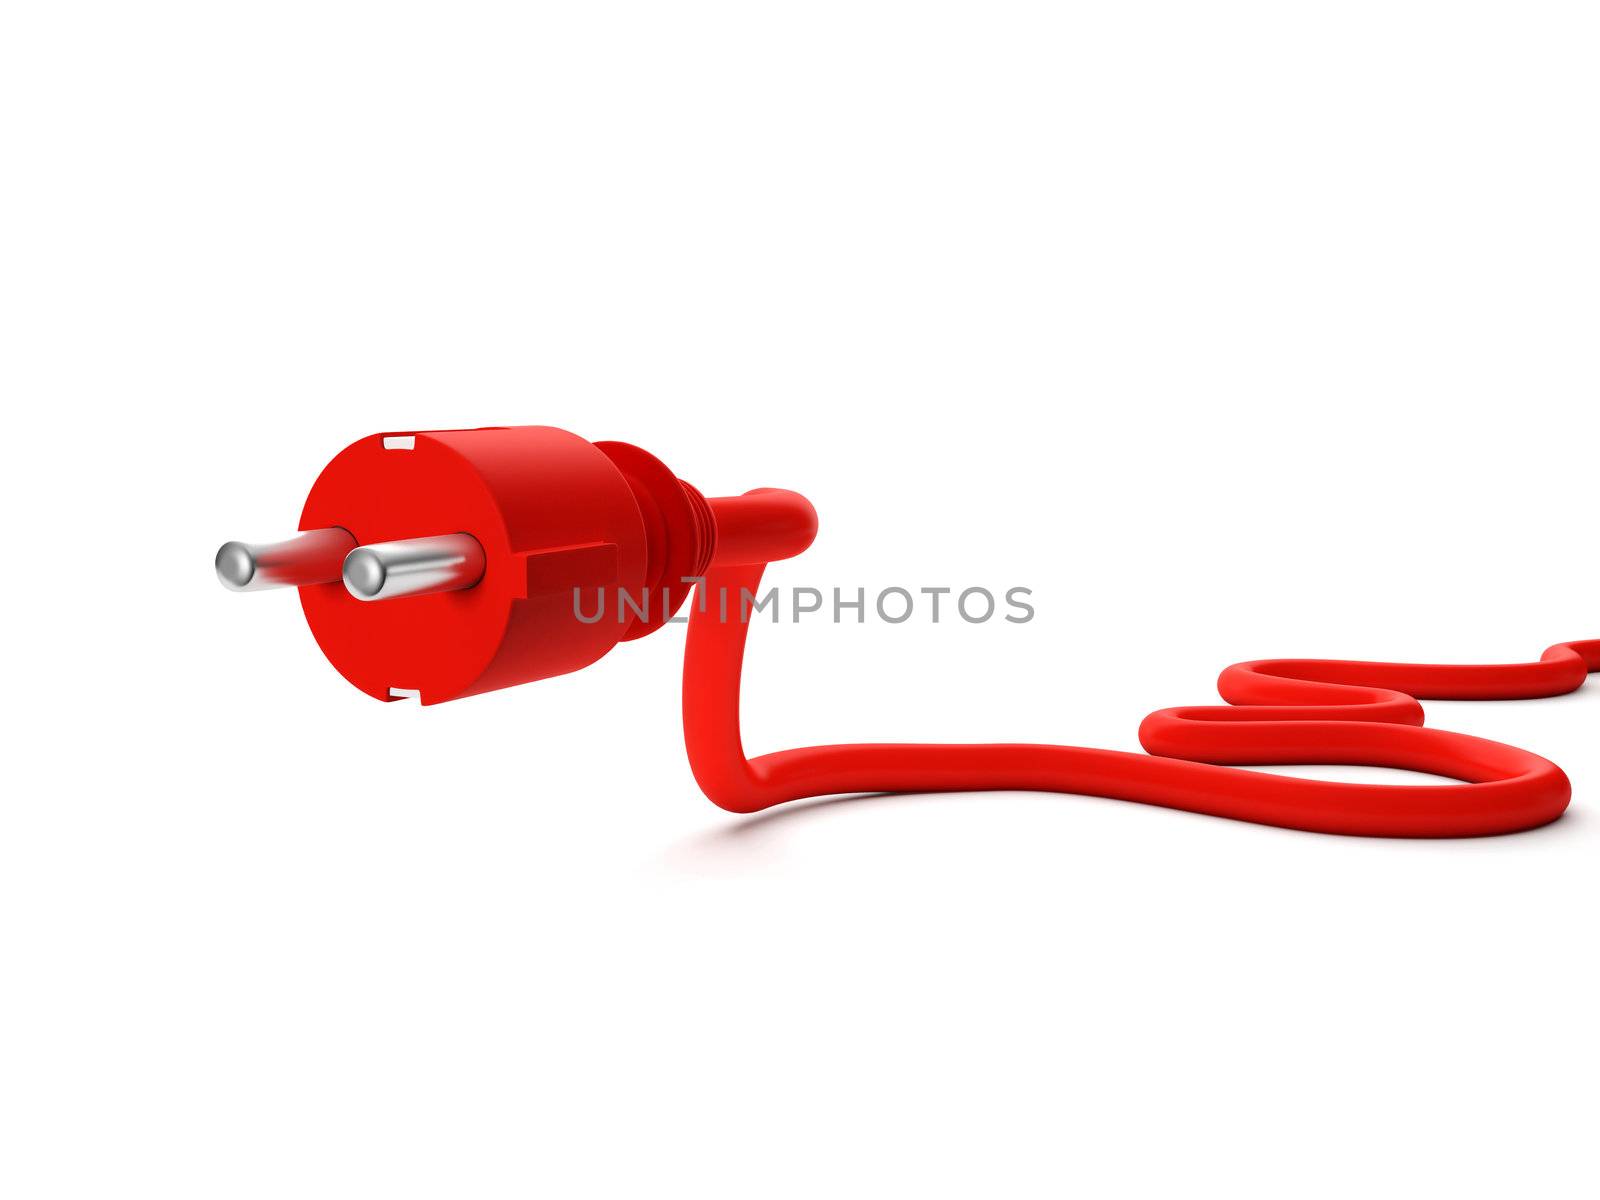 3d illustration: Red power outlet on a white background